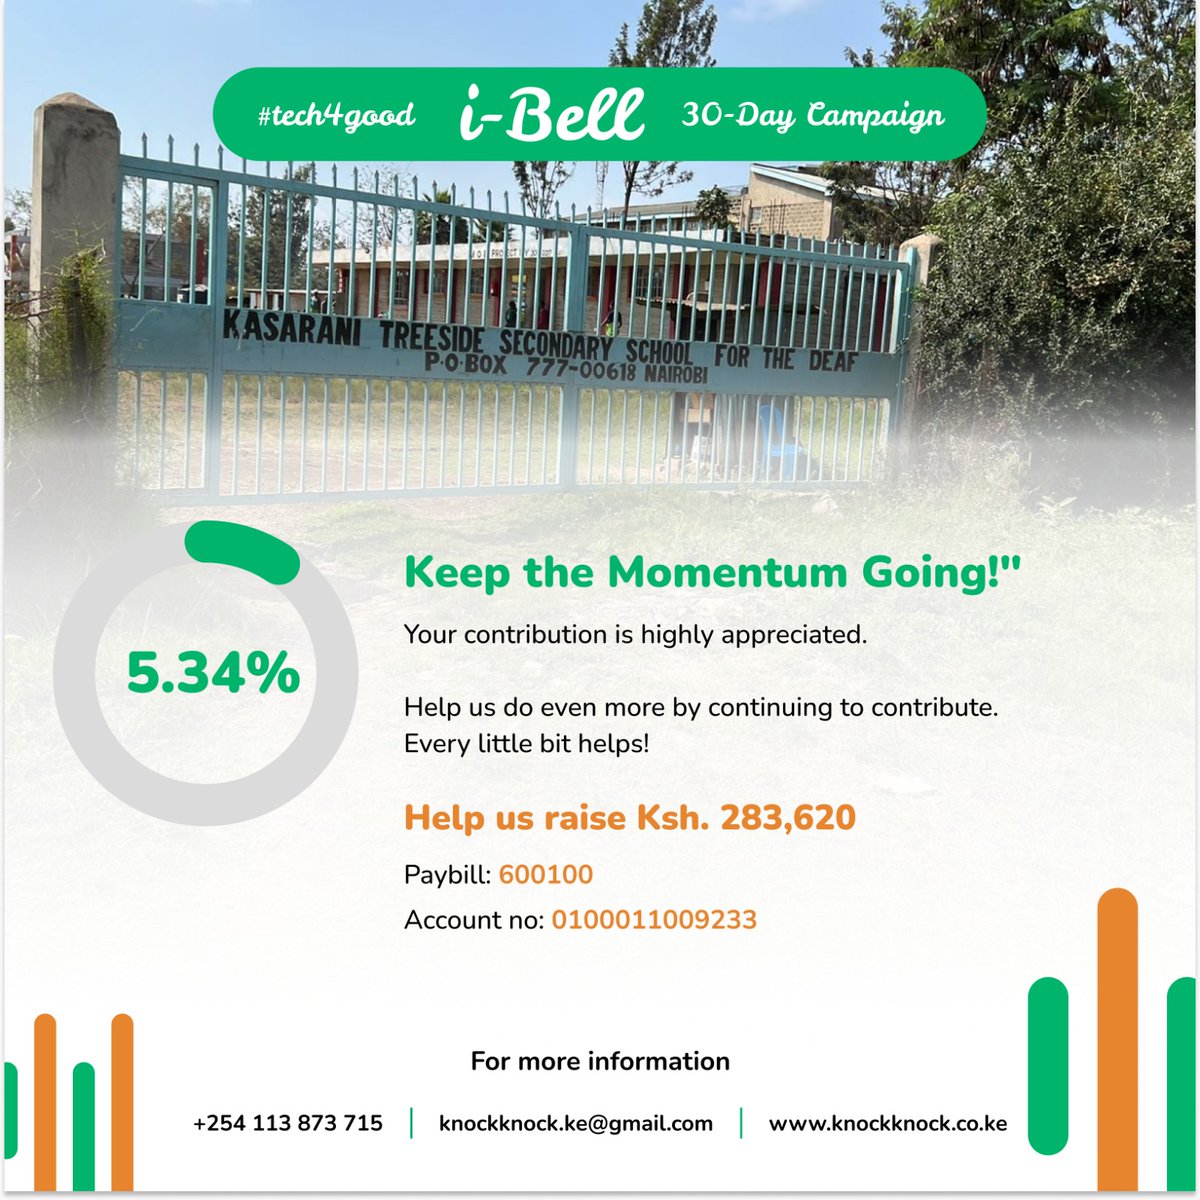 We are short of our target!! But our donation boxes remain open! Don't be left out in making an impact on the Deaf! You can contribute directly using our paybill number or from the campaign site: knockknock.co.ke/campaigns/tech…